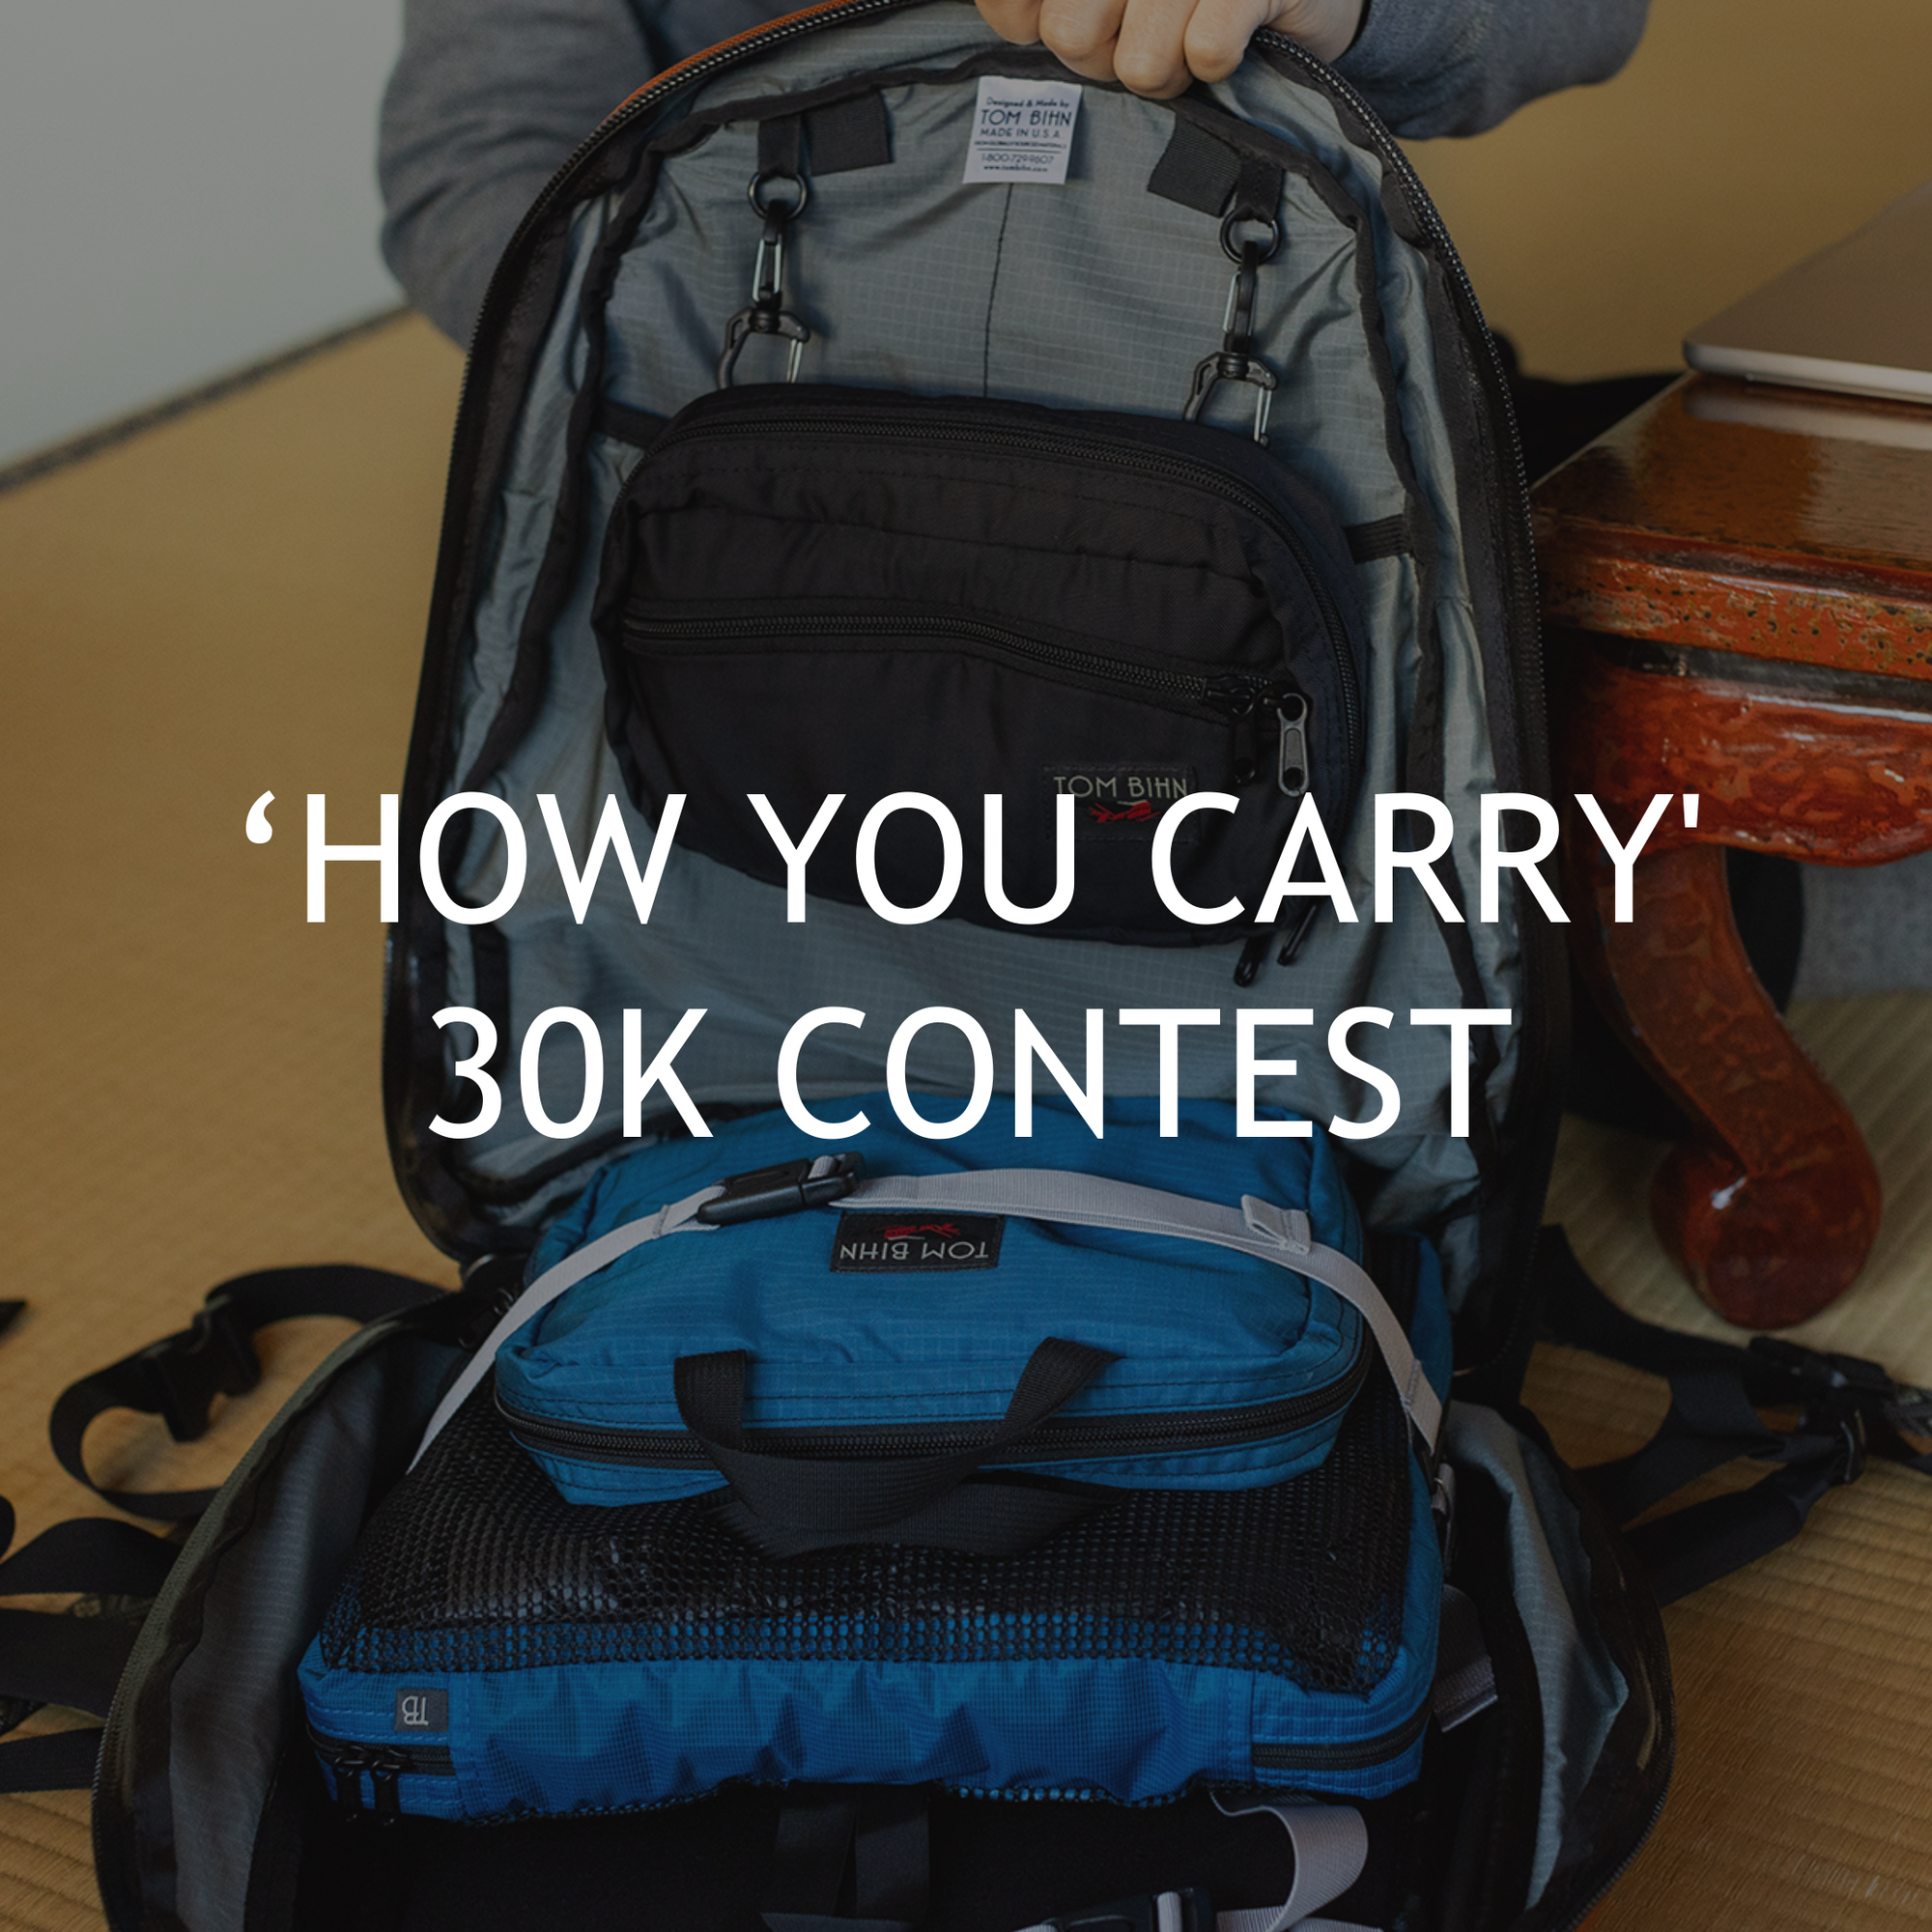 Join the 'How You Carry’ Contest and Celebrate with Us!